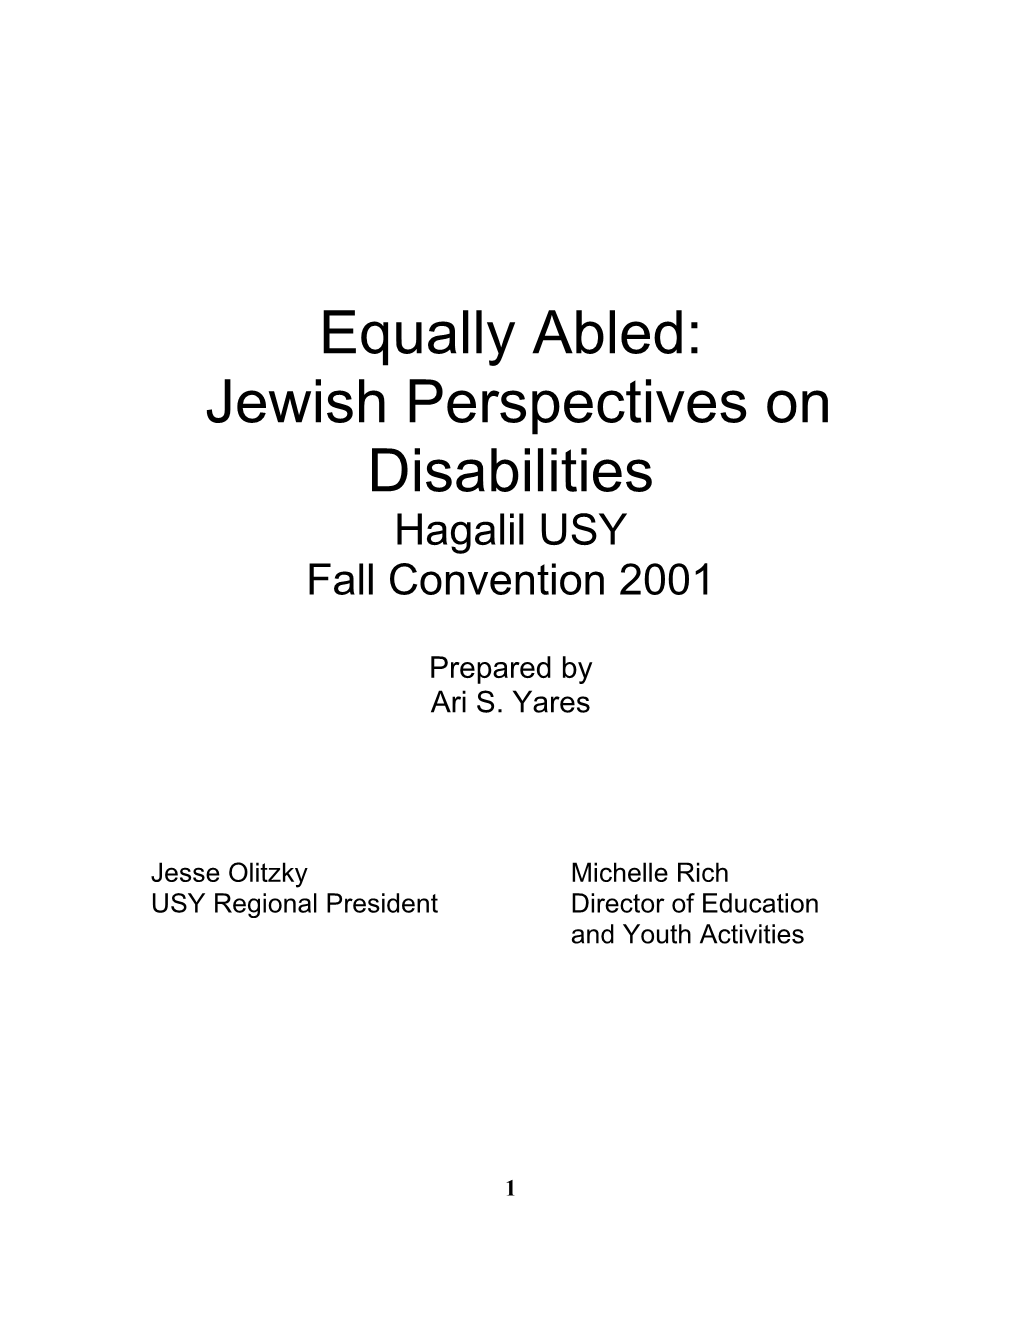 Judaism and Disabilities